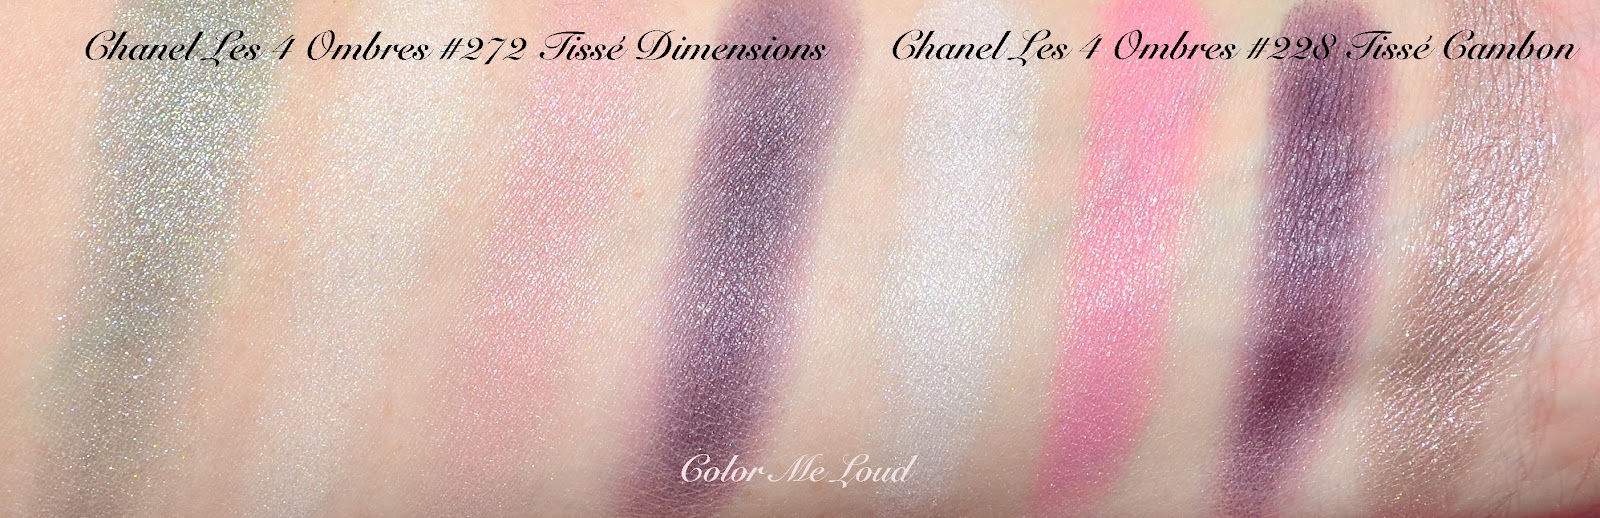 BRAND NEW CHANEL LES 4 OMBRES 04 TWEED BRUN ET ROSE/Application/Swatches  and Comparisons 